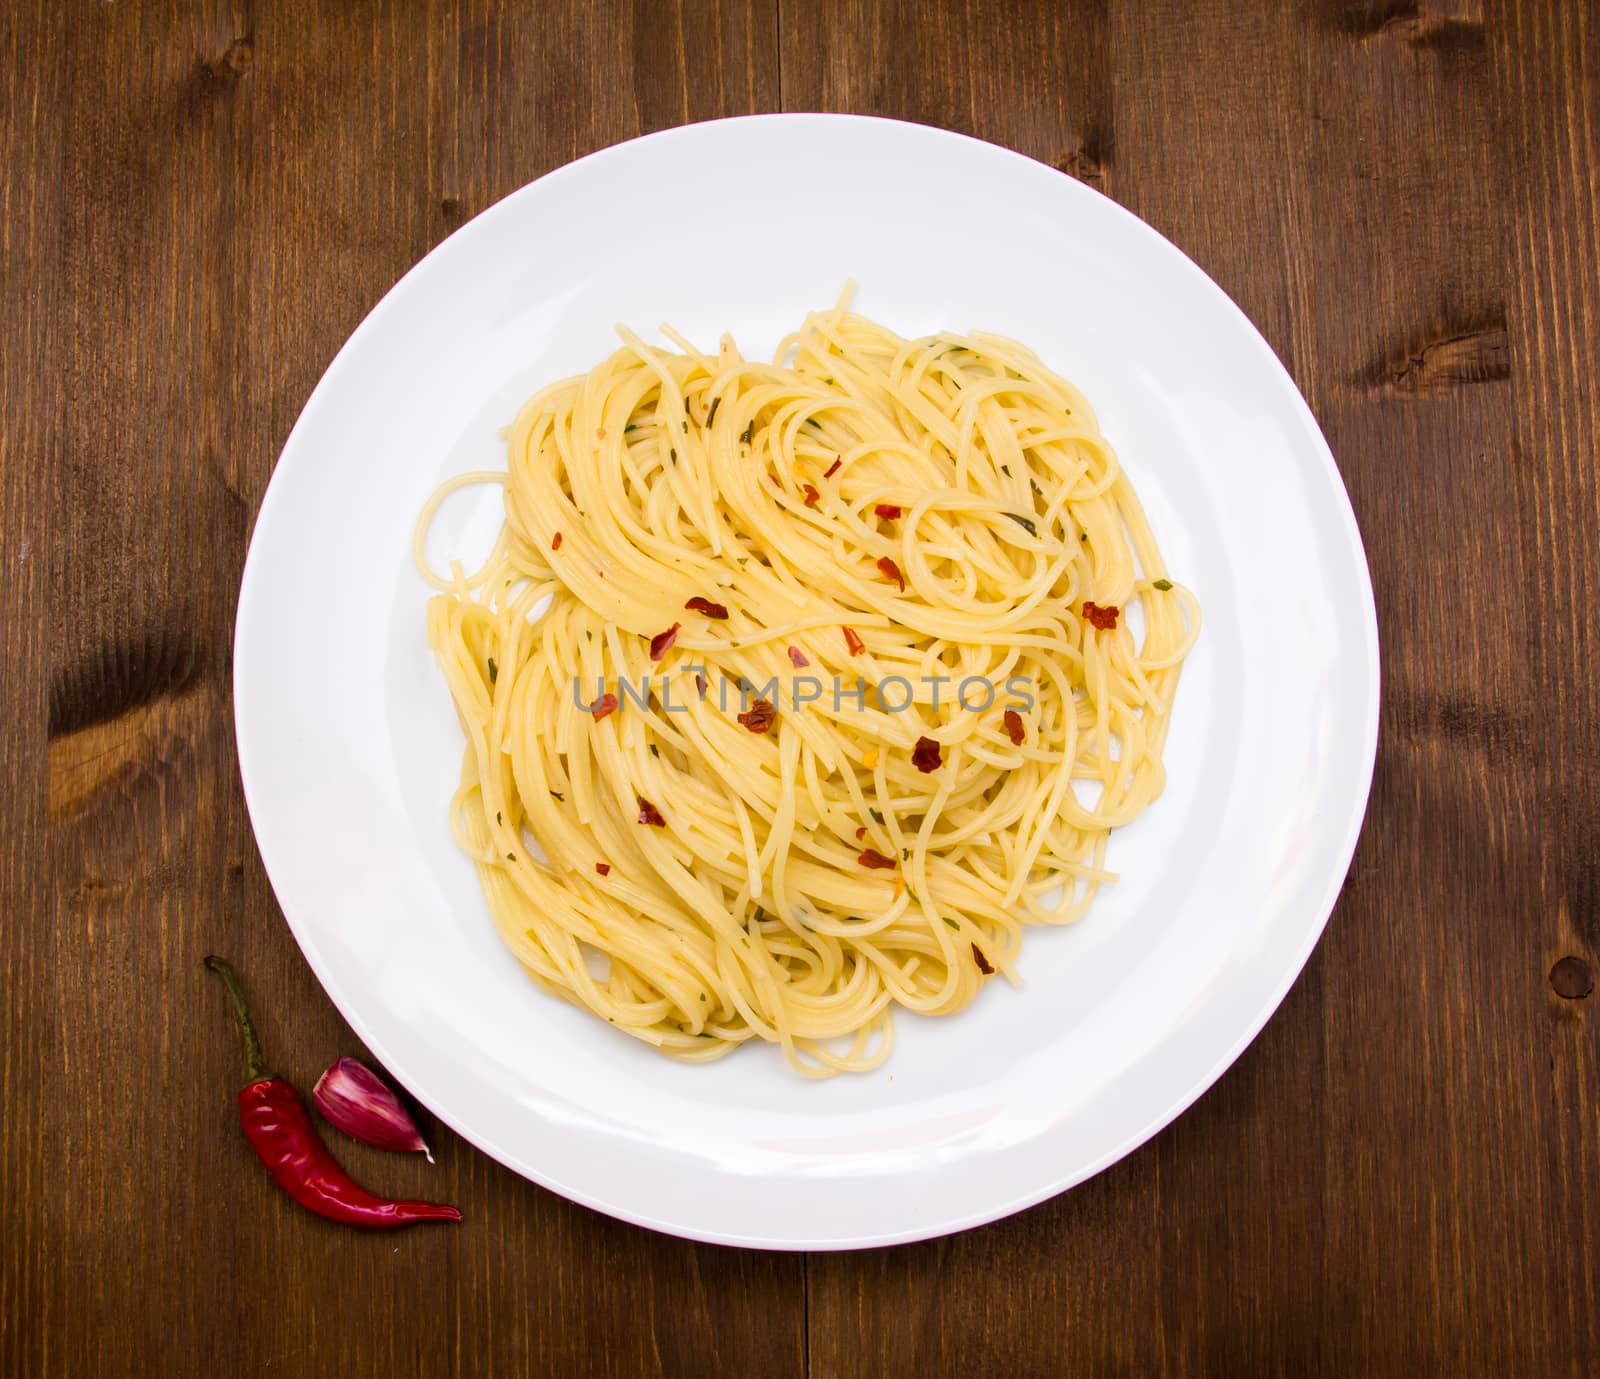 Spaghetti with garlic and chili peppers on wooden table seen from above